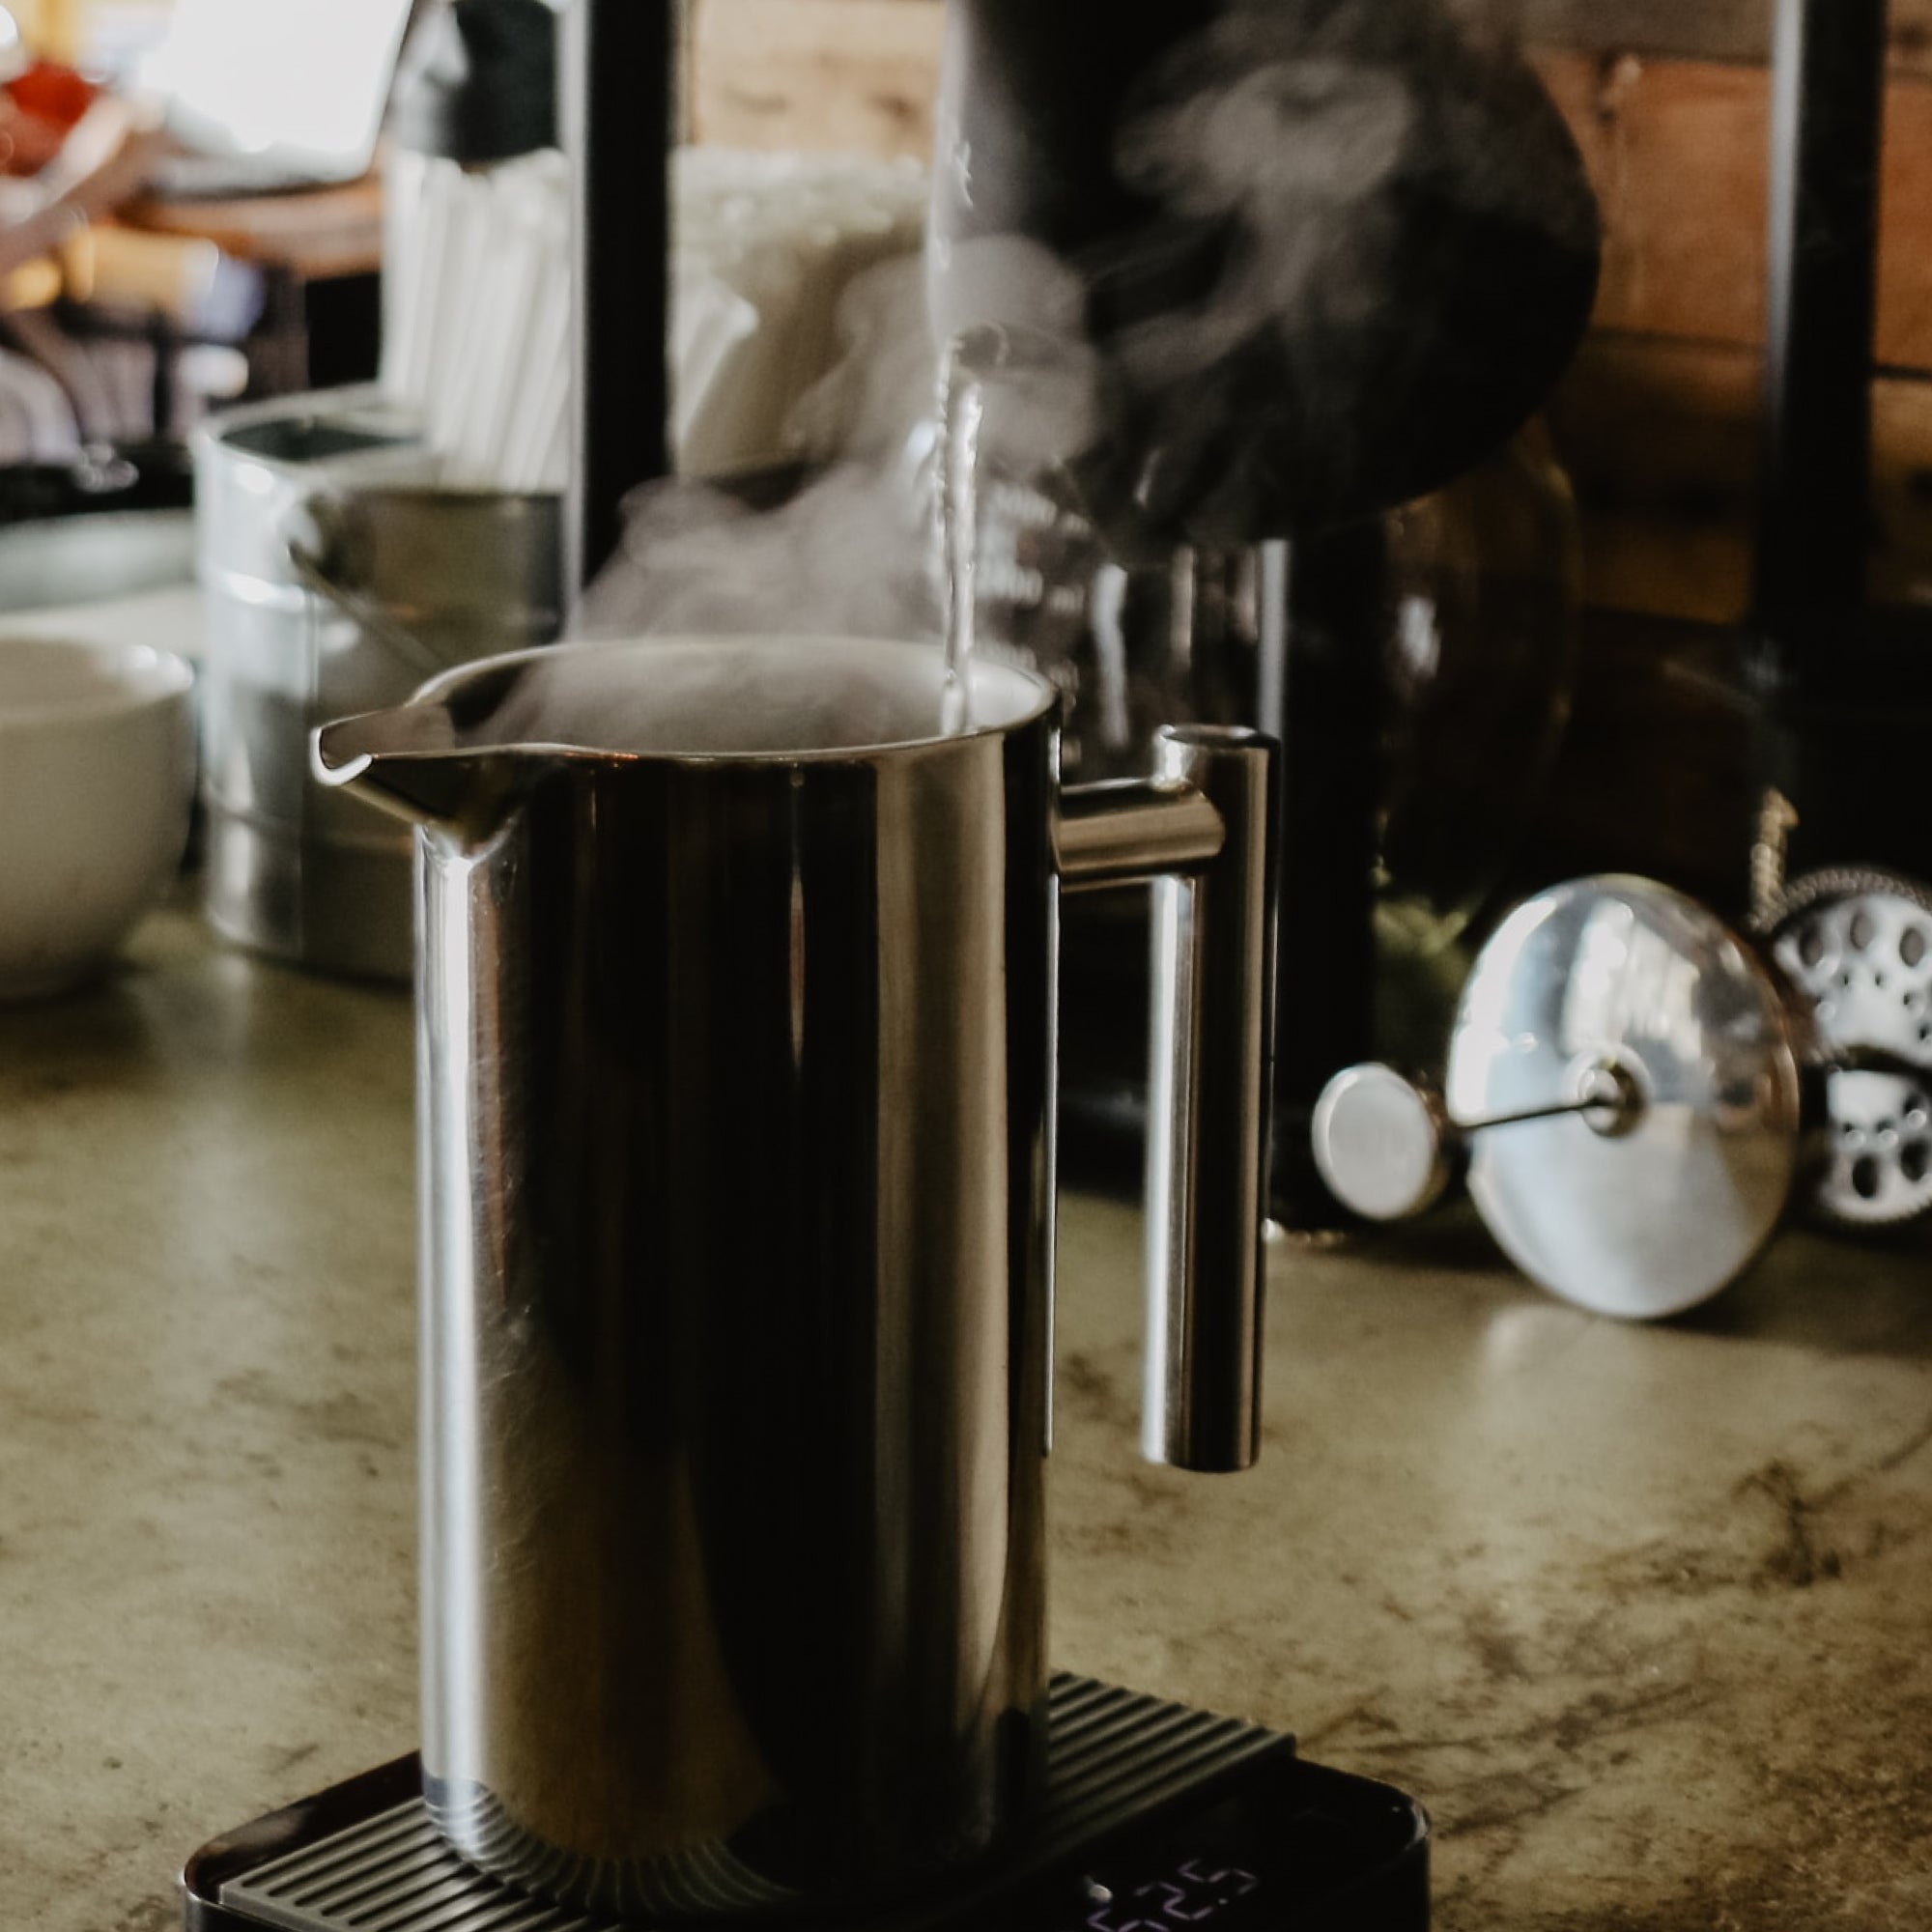 Hot water being poured into a French Press coffee brewer